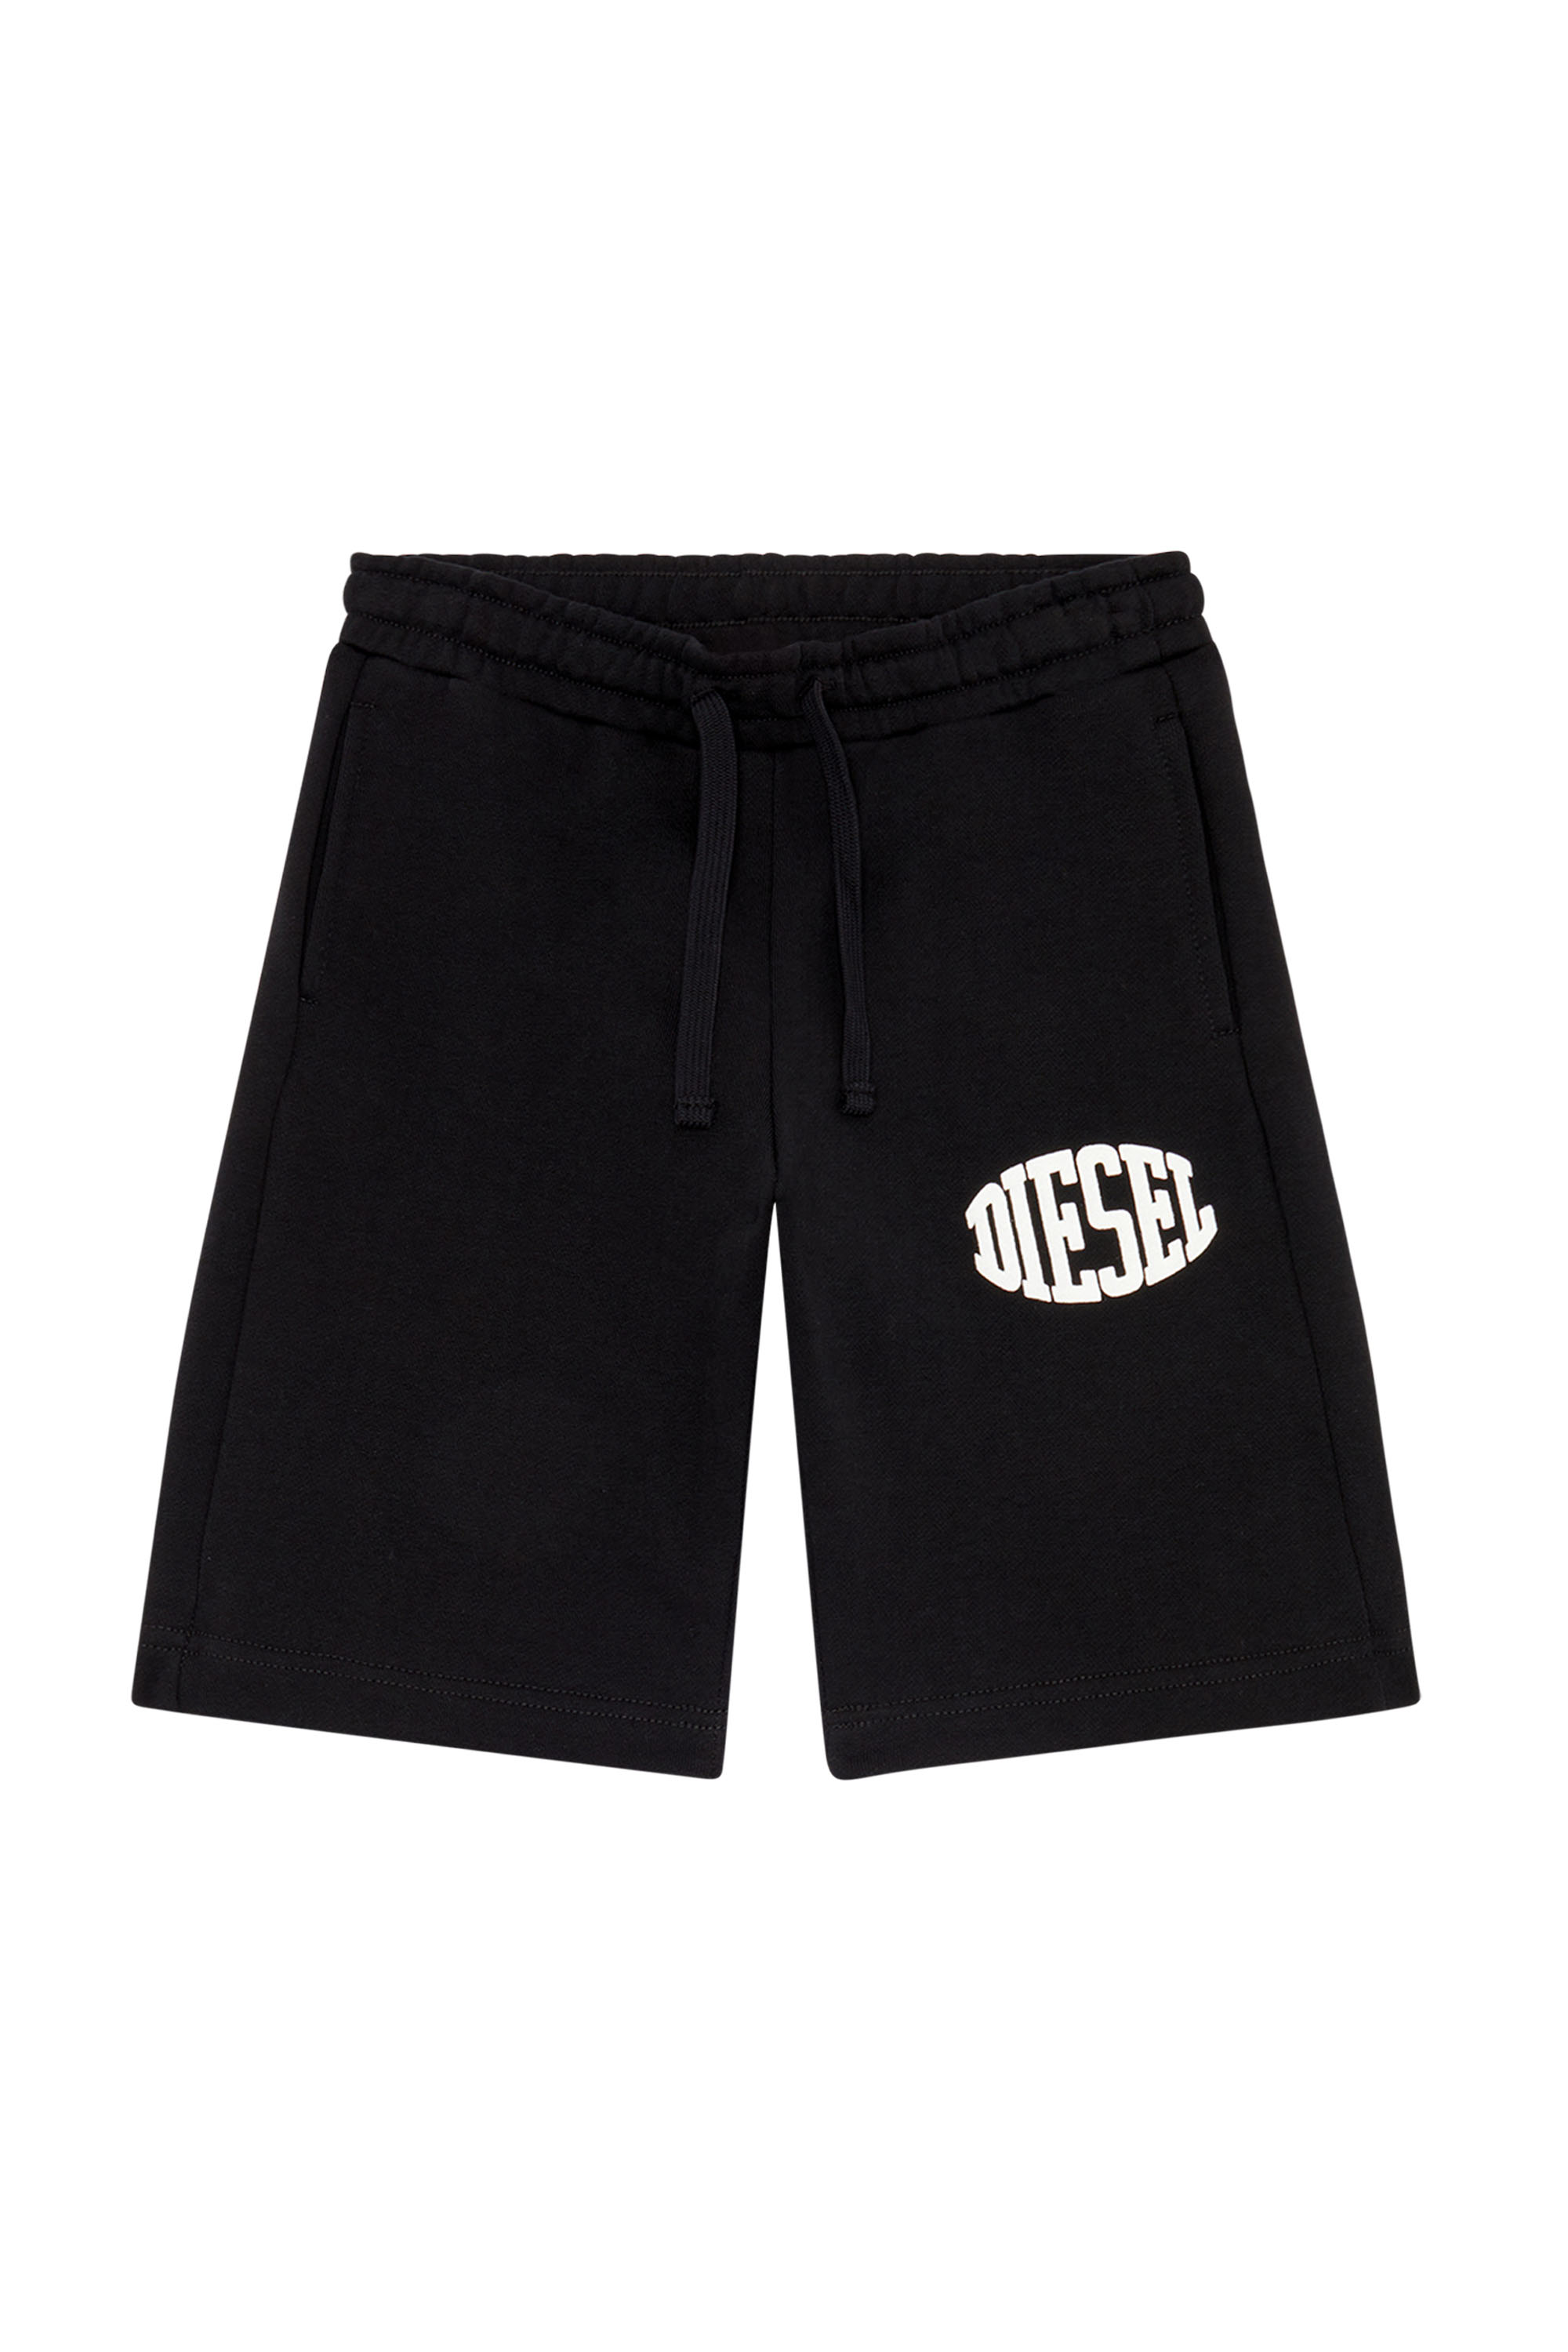 Sweat shorts with Diesel lettering